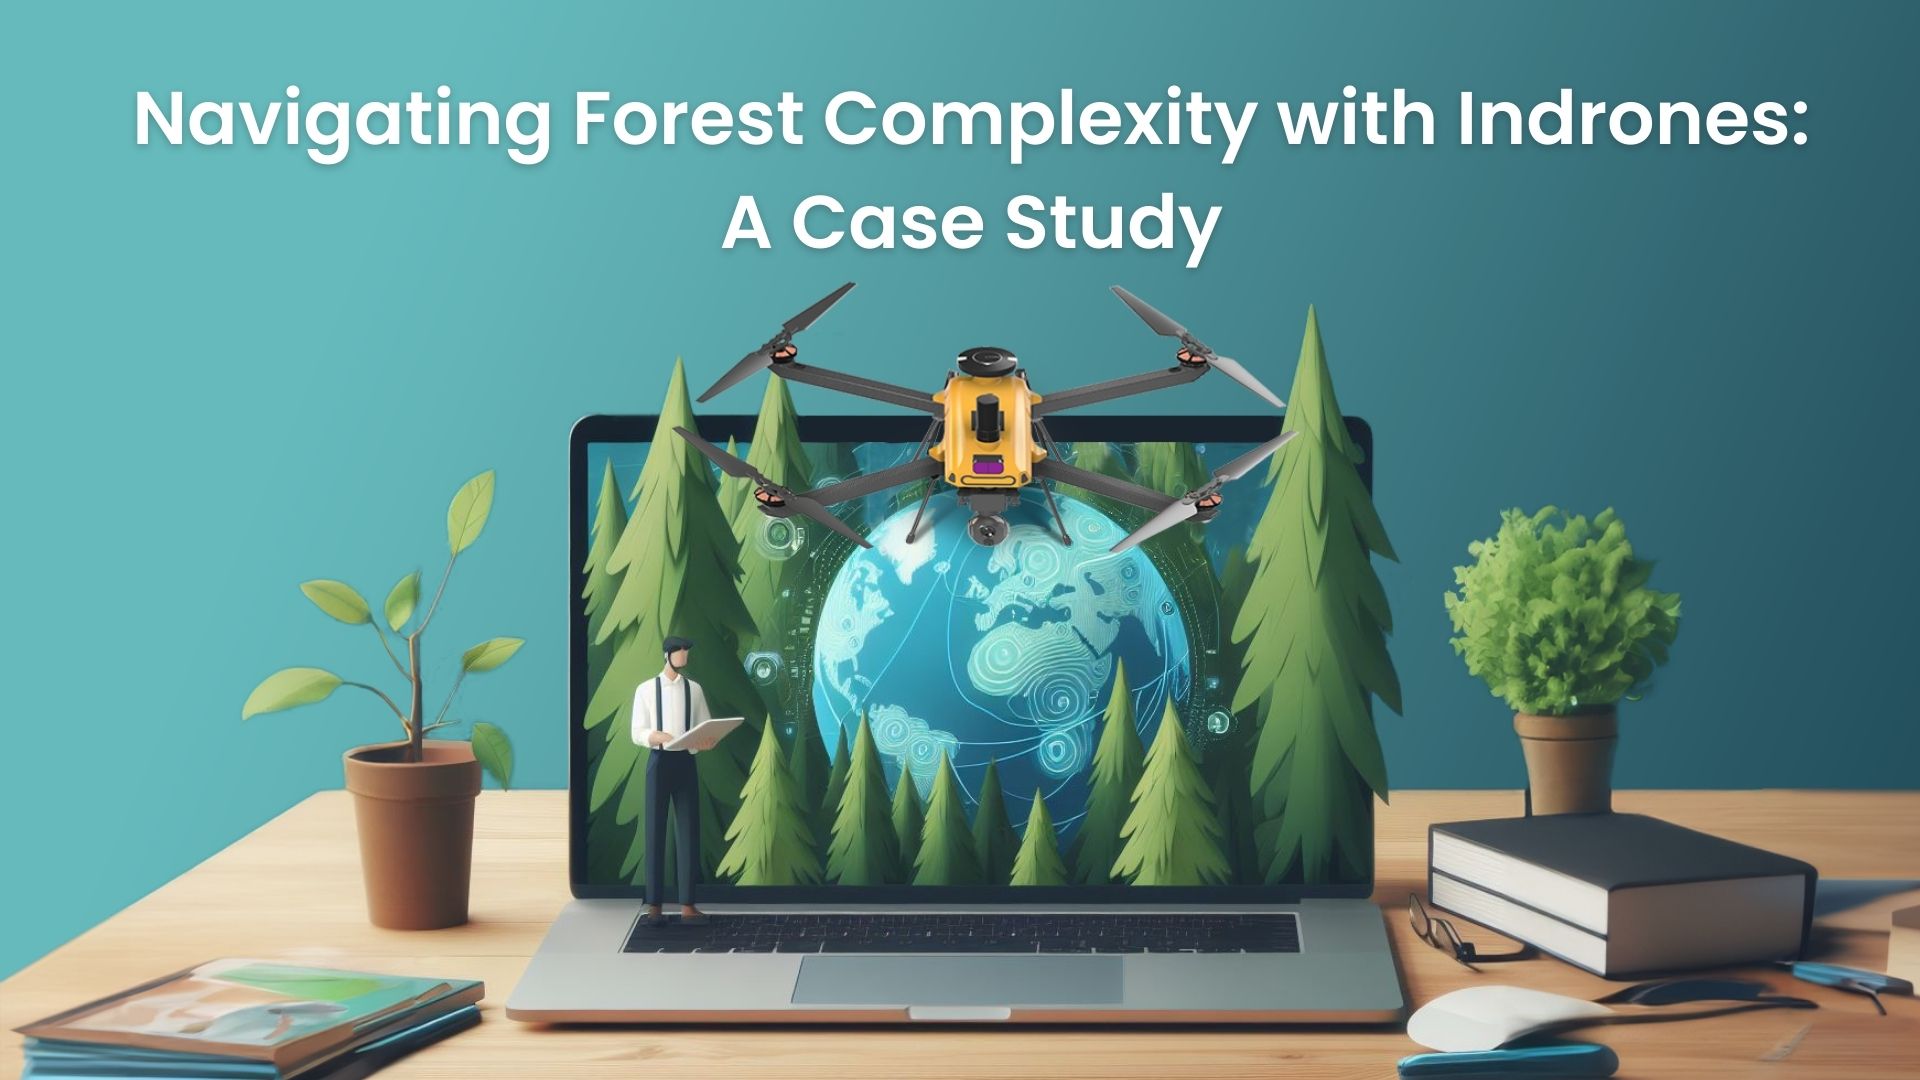 Image containing the title “Navigating Forest Complexity with Indrones: A Case Study 